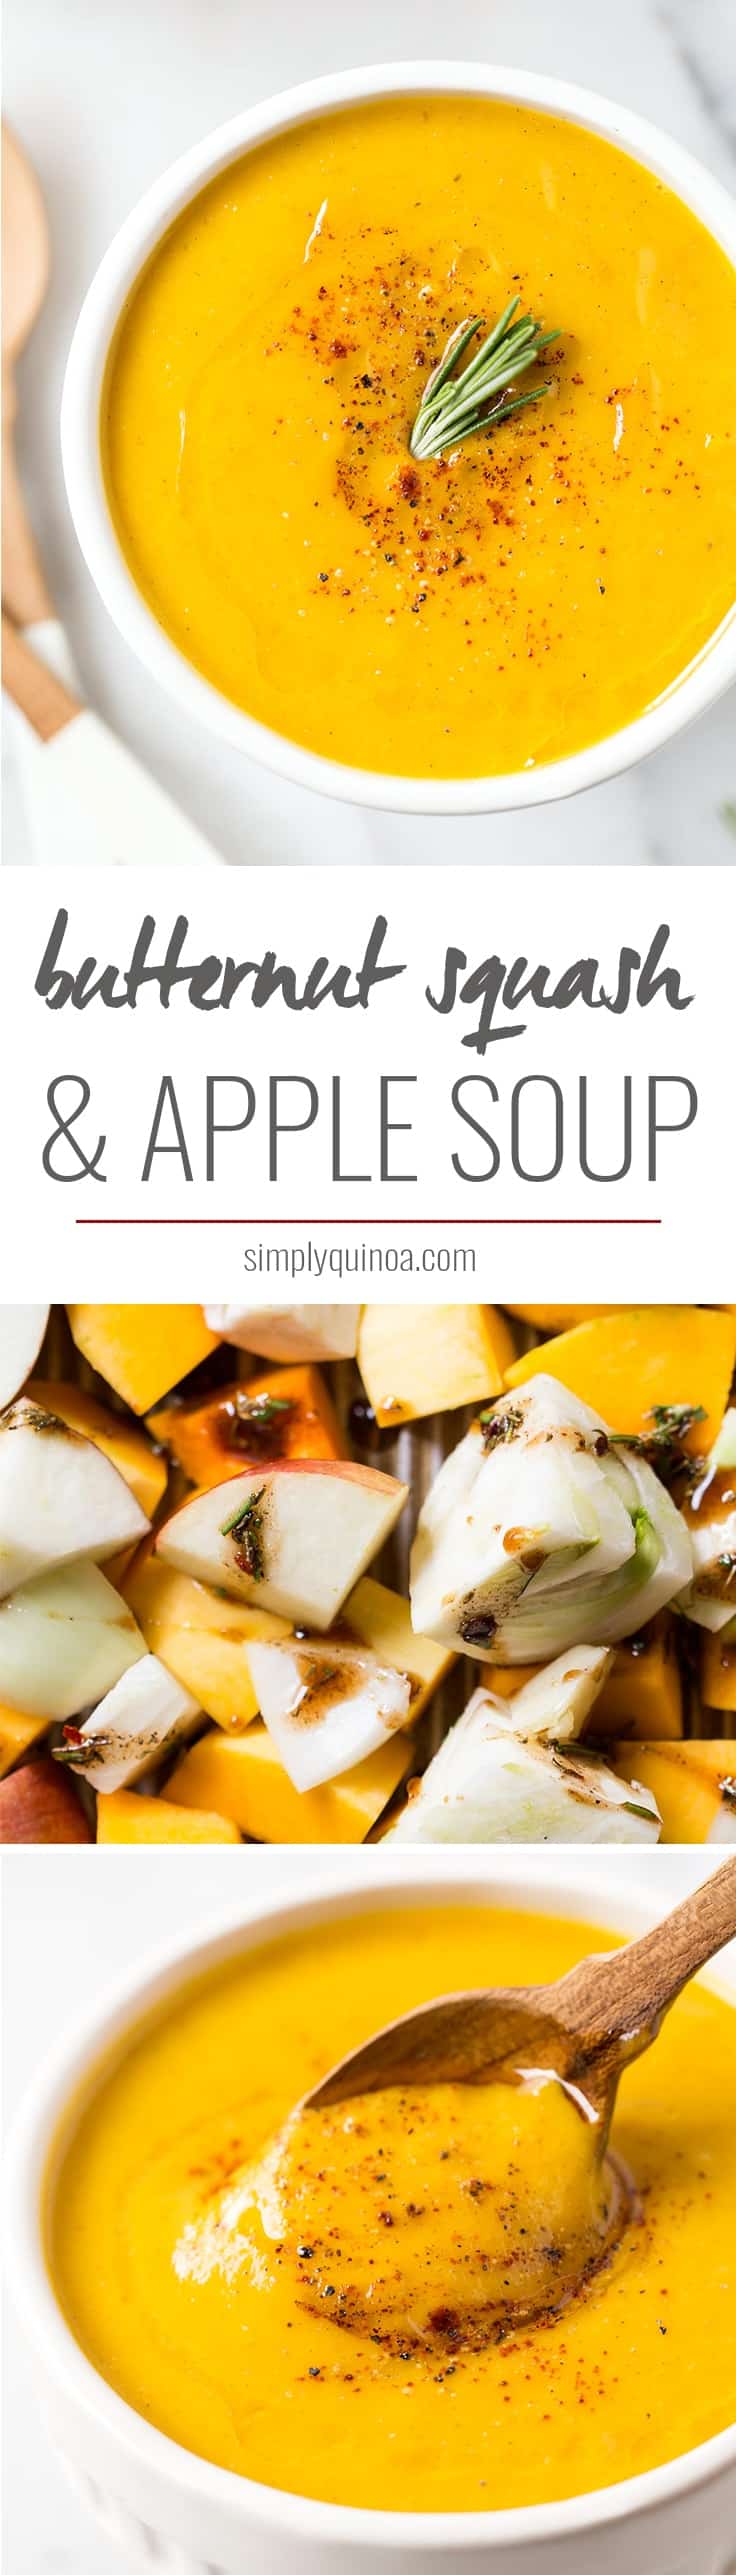 BUTTERNUT SQUASH & APPLE SOUP with roasted fennel and garlic...plus a new way to make soup that adds tons of flavor AND saves time!